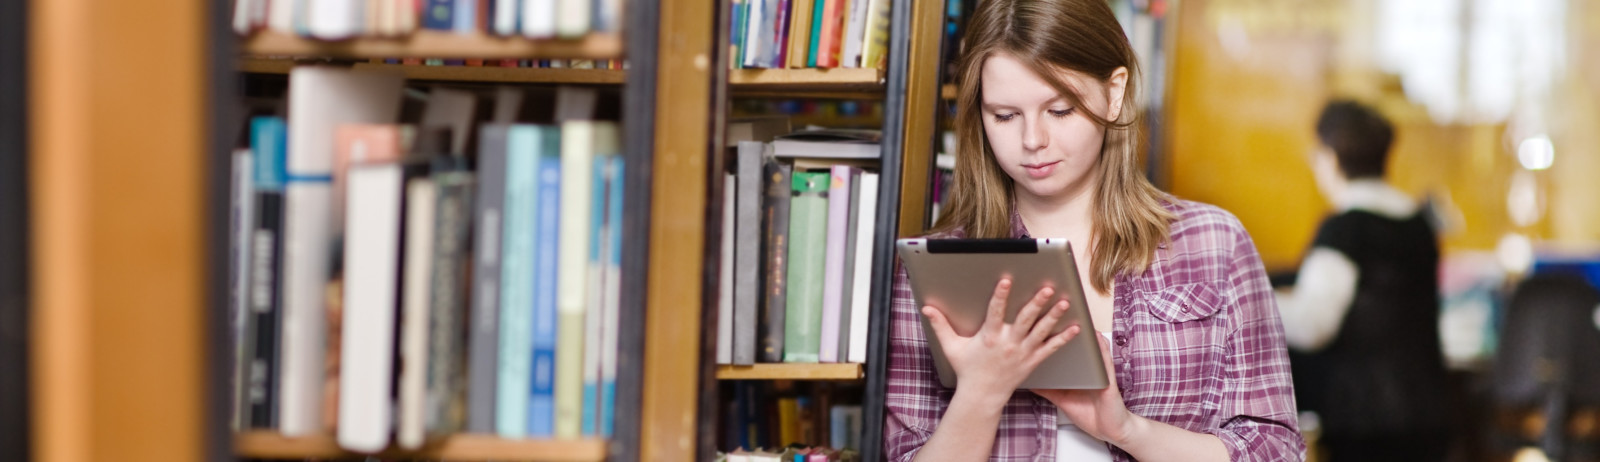 A female test taker standing near a bookshelf  in a library and looking into a tablet.